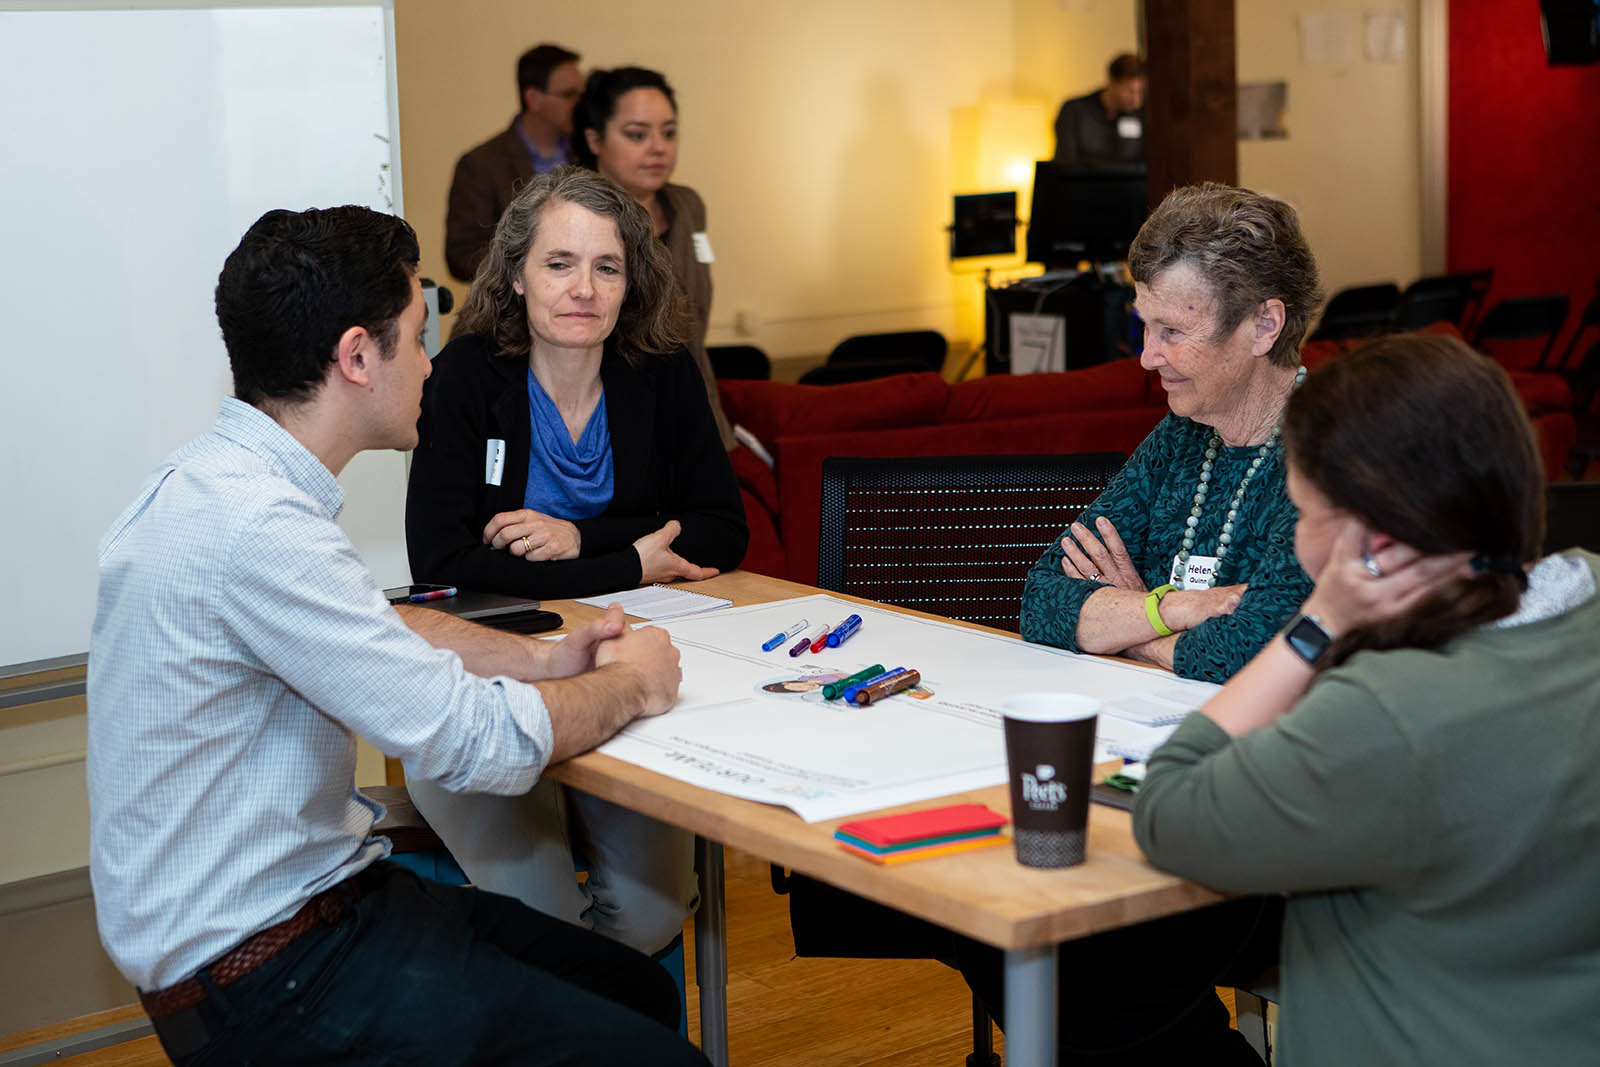 Collaborating across disciplines. Concord Consortium developer Eli Kosminsky and Director of Impact Jen Goree brainstorm with learning researcher and assessment specialist Britte Cheng and Helen Quinn, Professor Emerita of Particle Physics and Astrophysics.